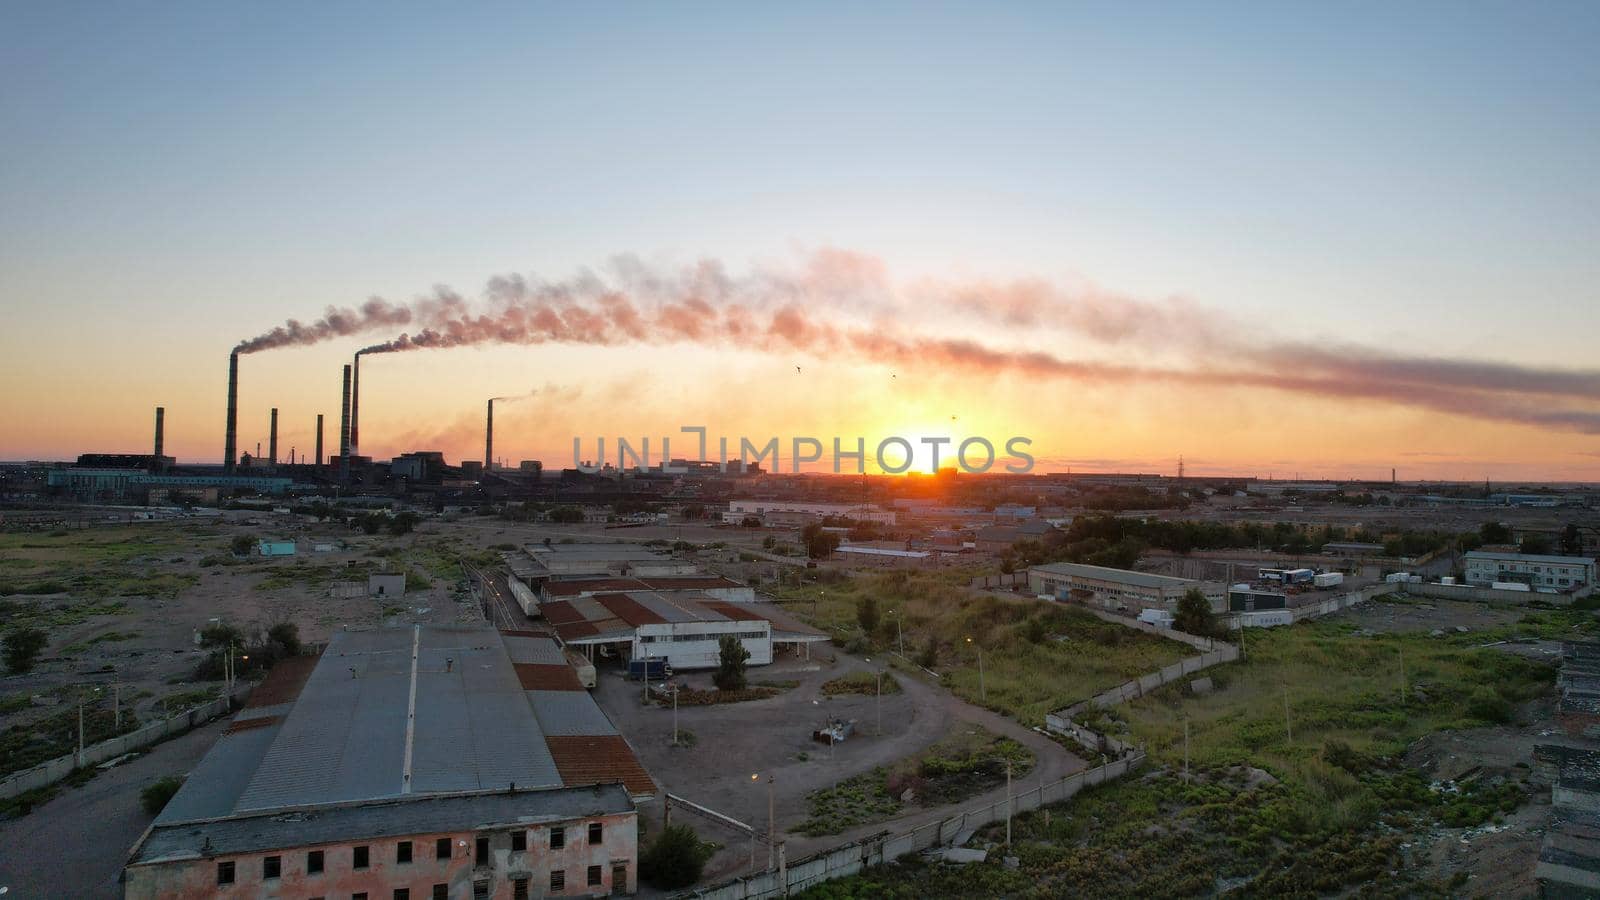 An epic sunset with a view of the smoking factory by Passcal